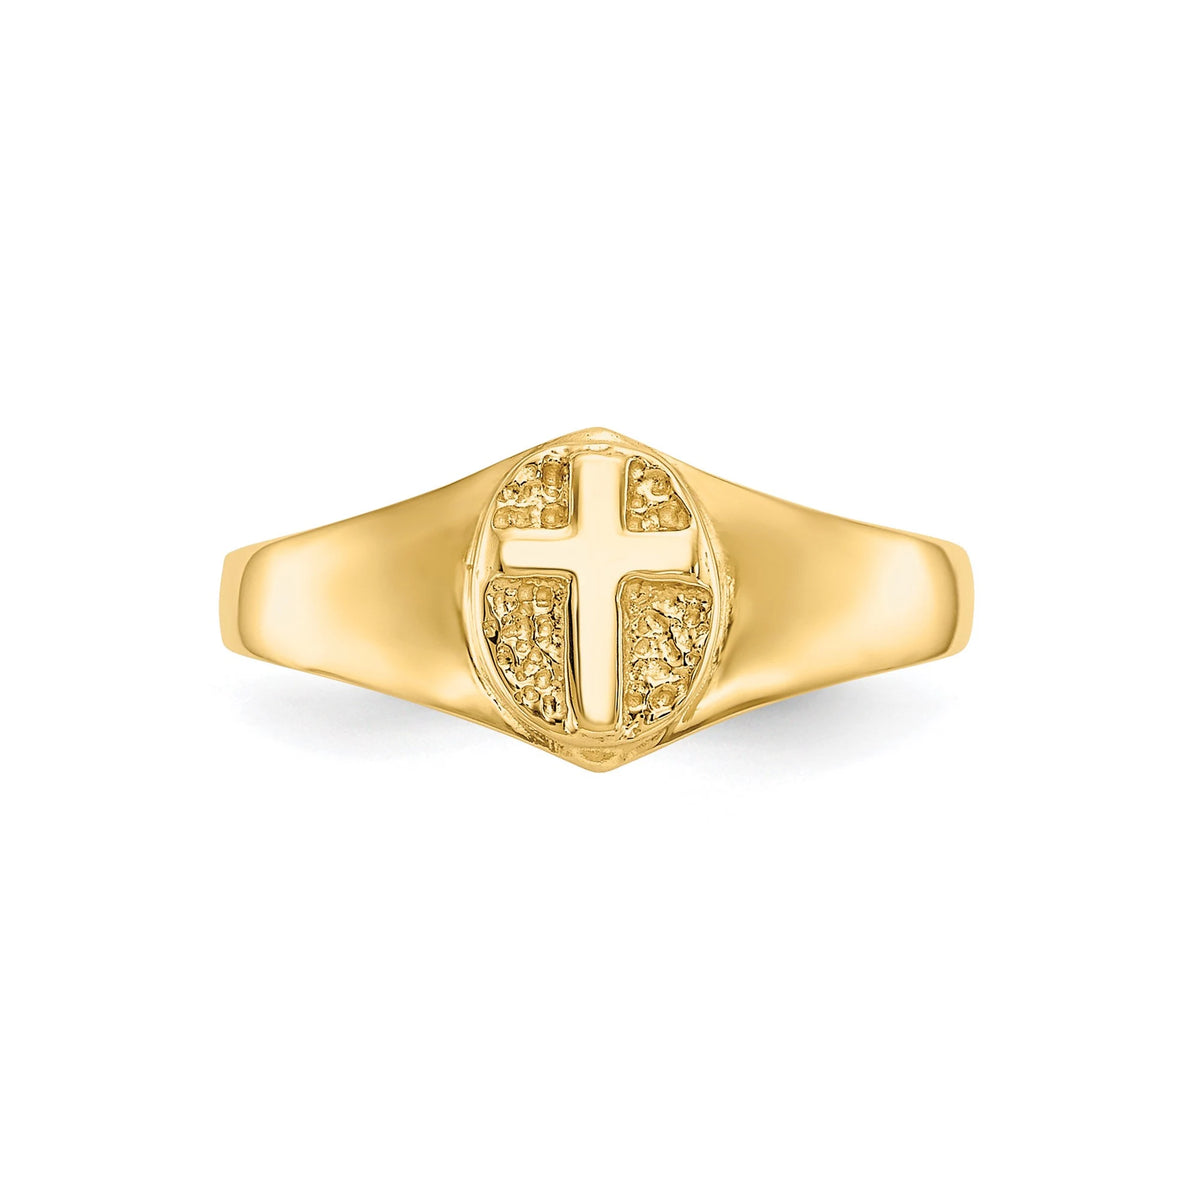 14k Yellow Gold Raised Cross Ring Baby Child  Size 1 - 5 Baby/Toddler Size Children's Ring Band with Cross - Gift Box Included - Made in USA